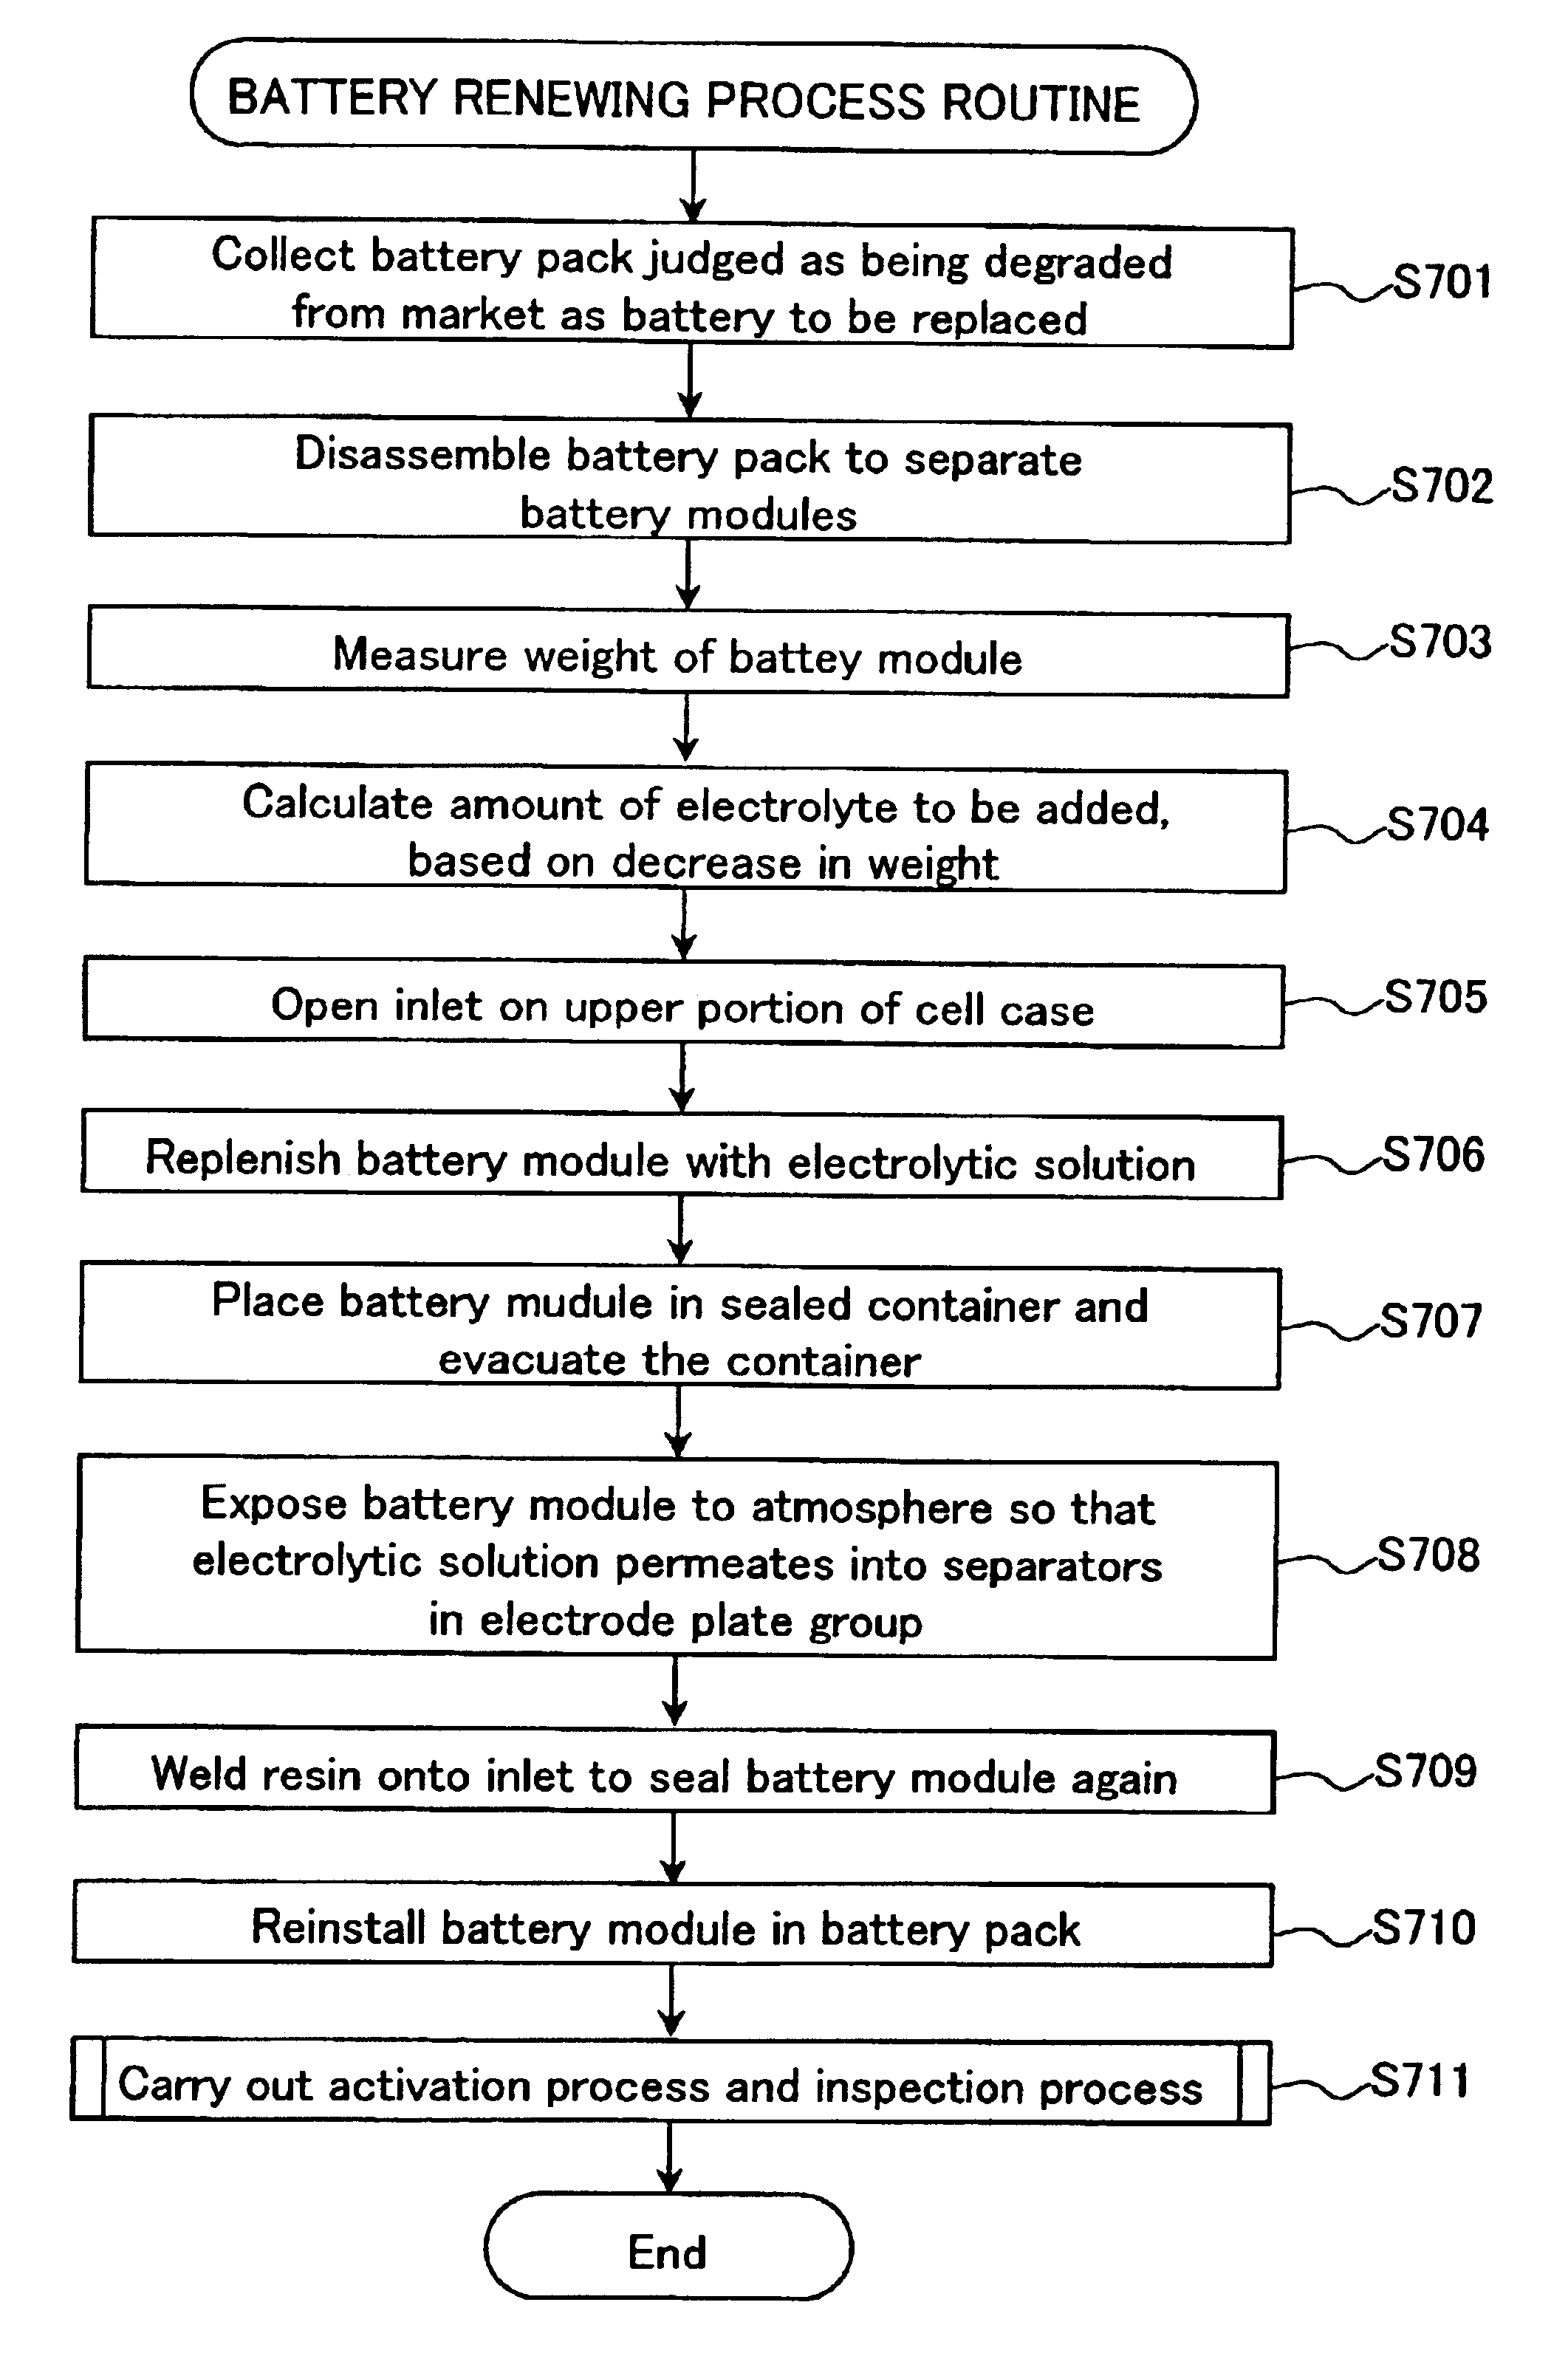 Method for recycling battery pack